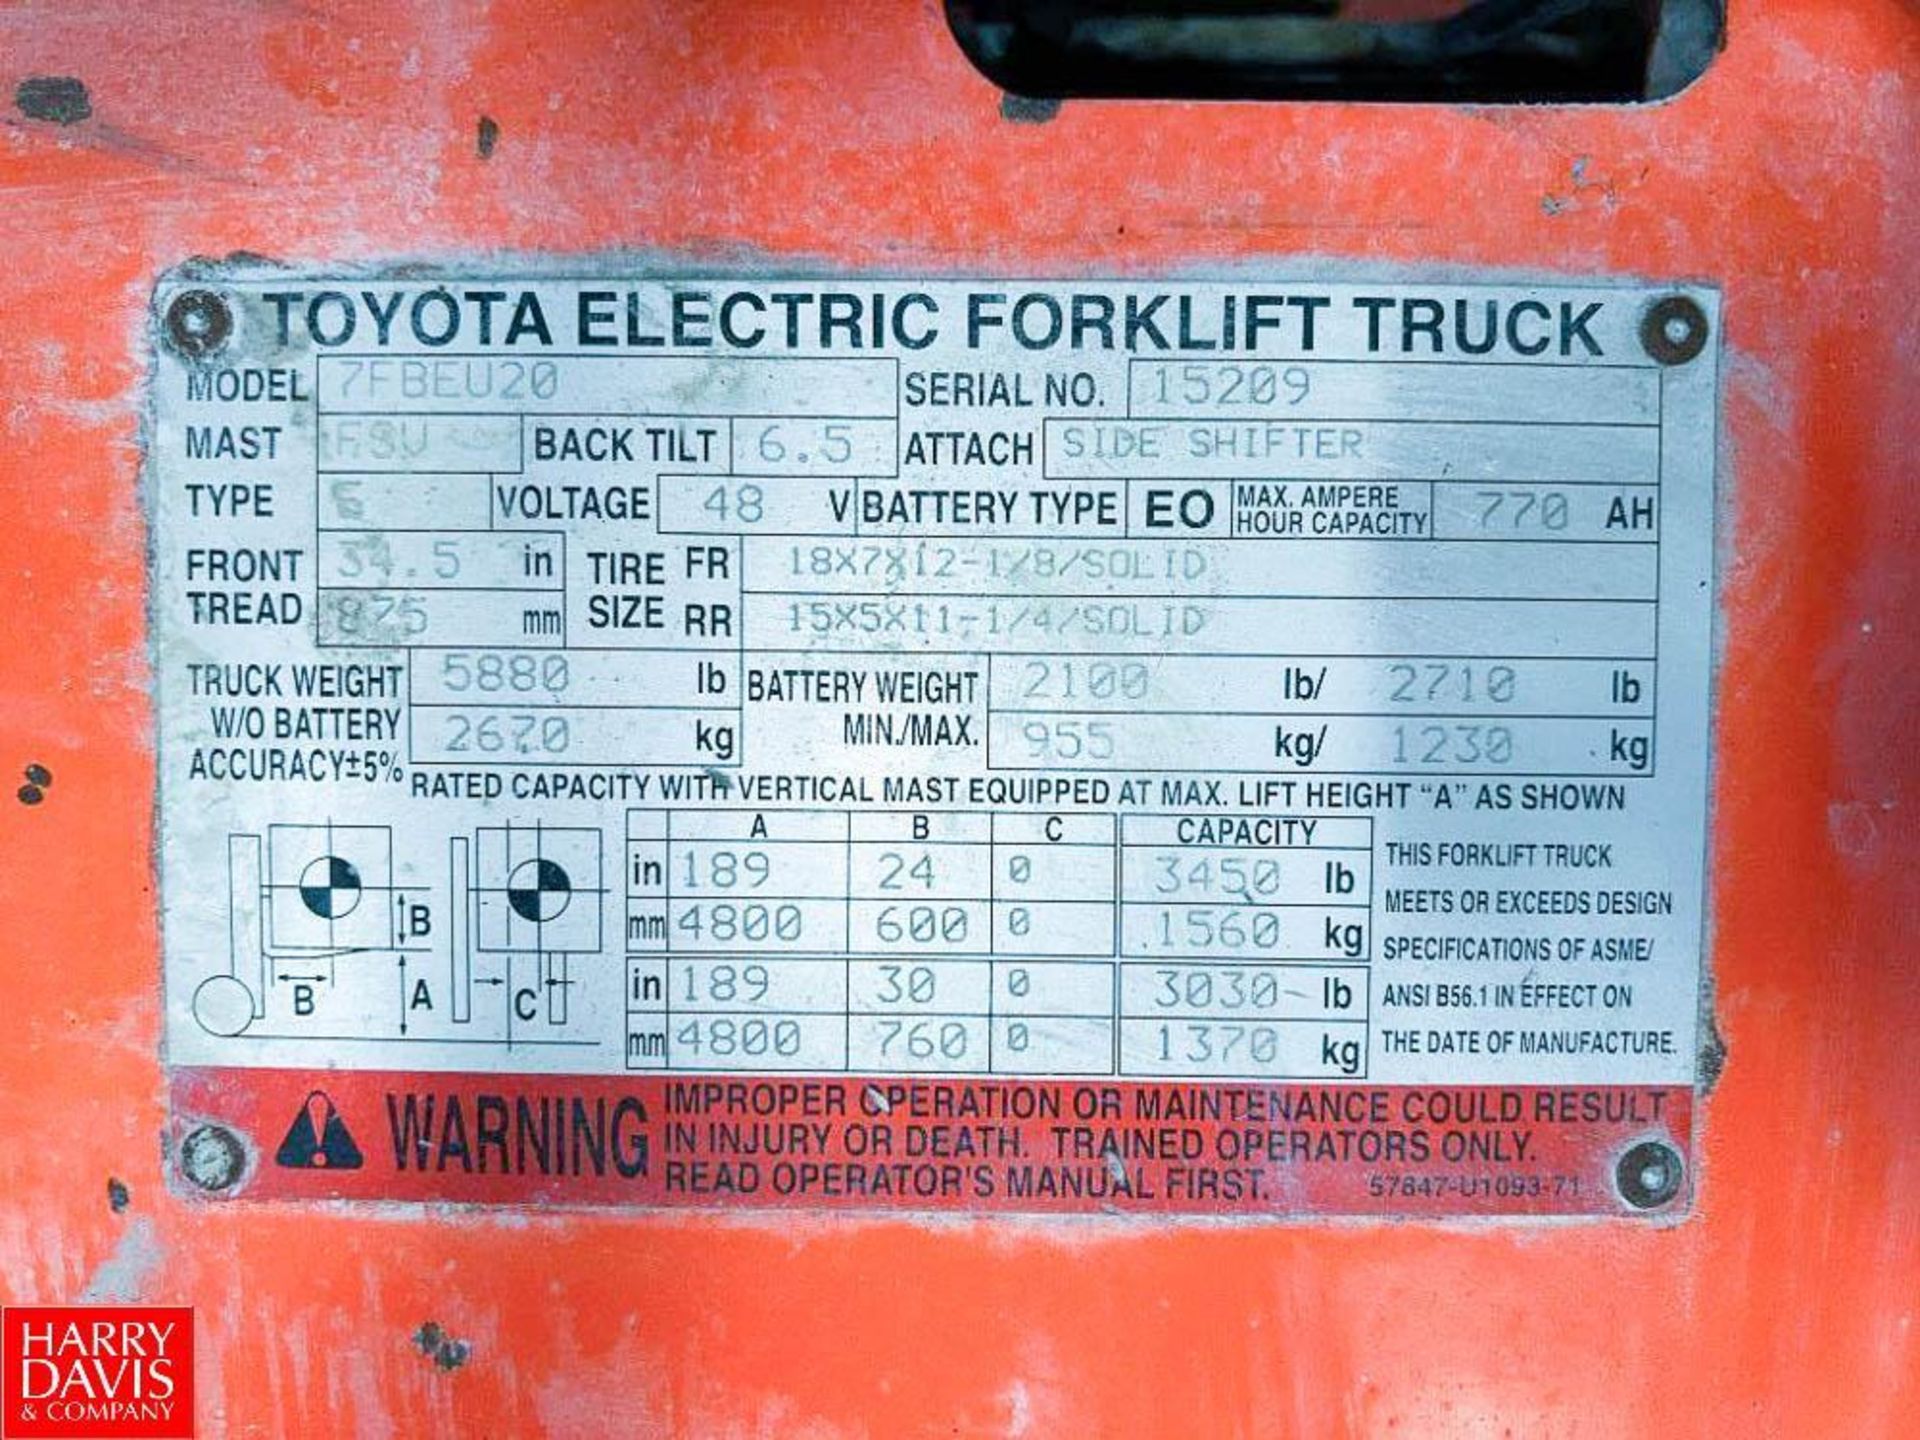 Toyota 3,450 LB Capacity Electric Fork Lift with 48 Volt Battery, Model: 7FBEAU20, S/N: 15209 - Image 2 of 2